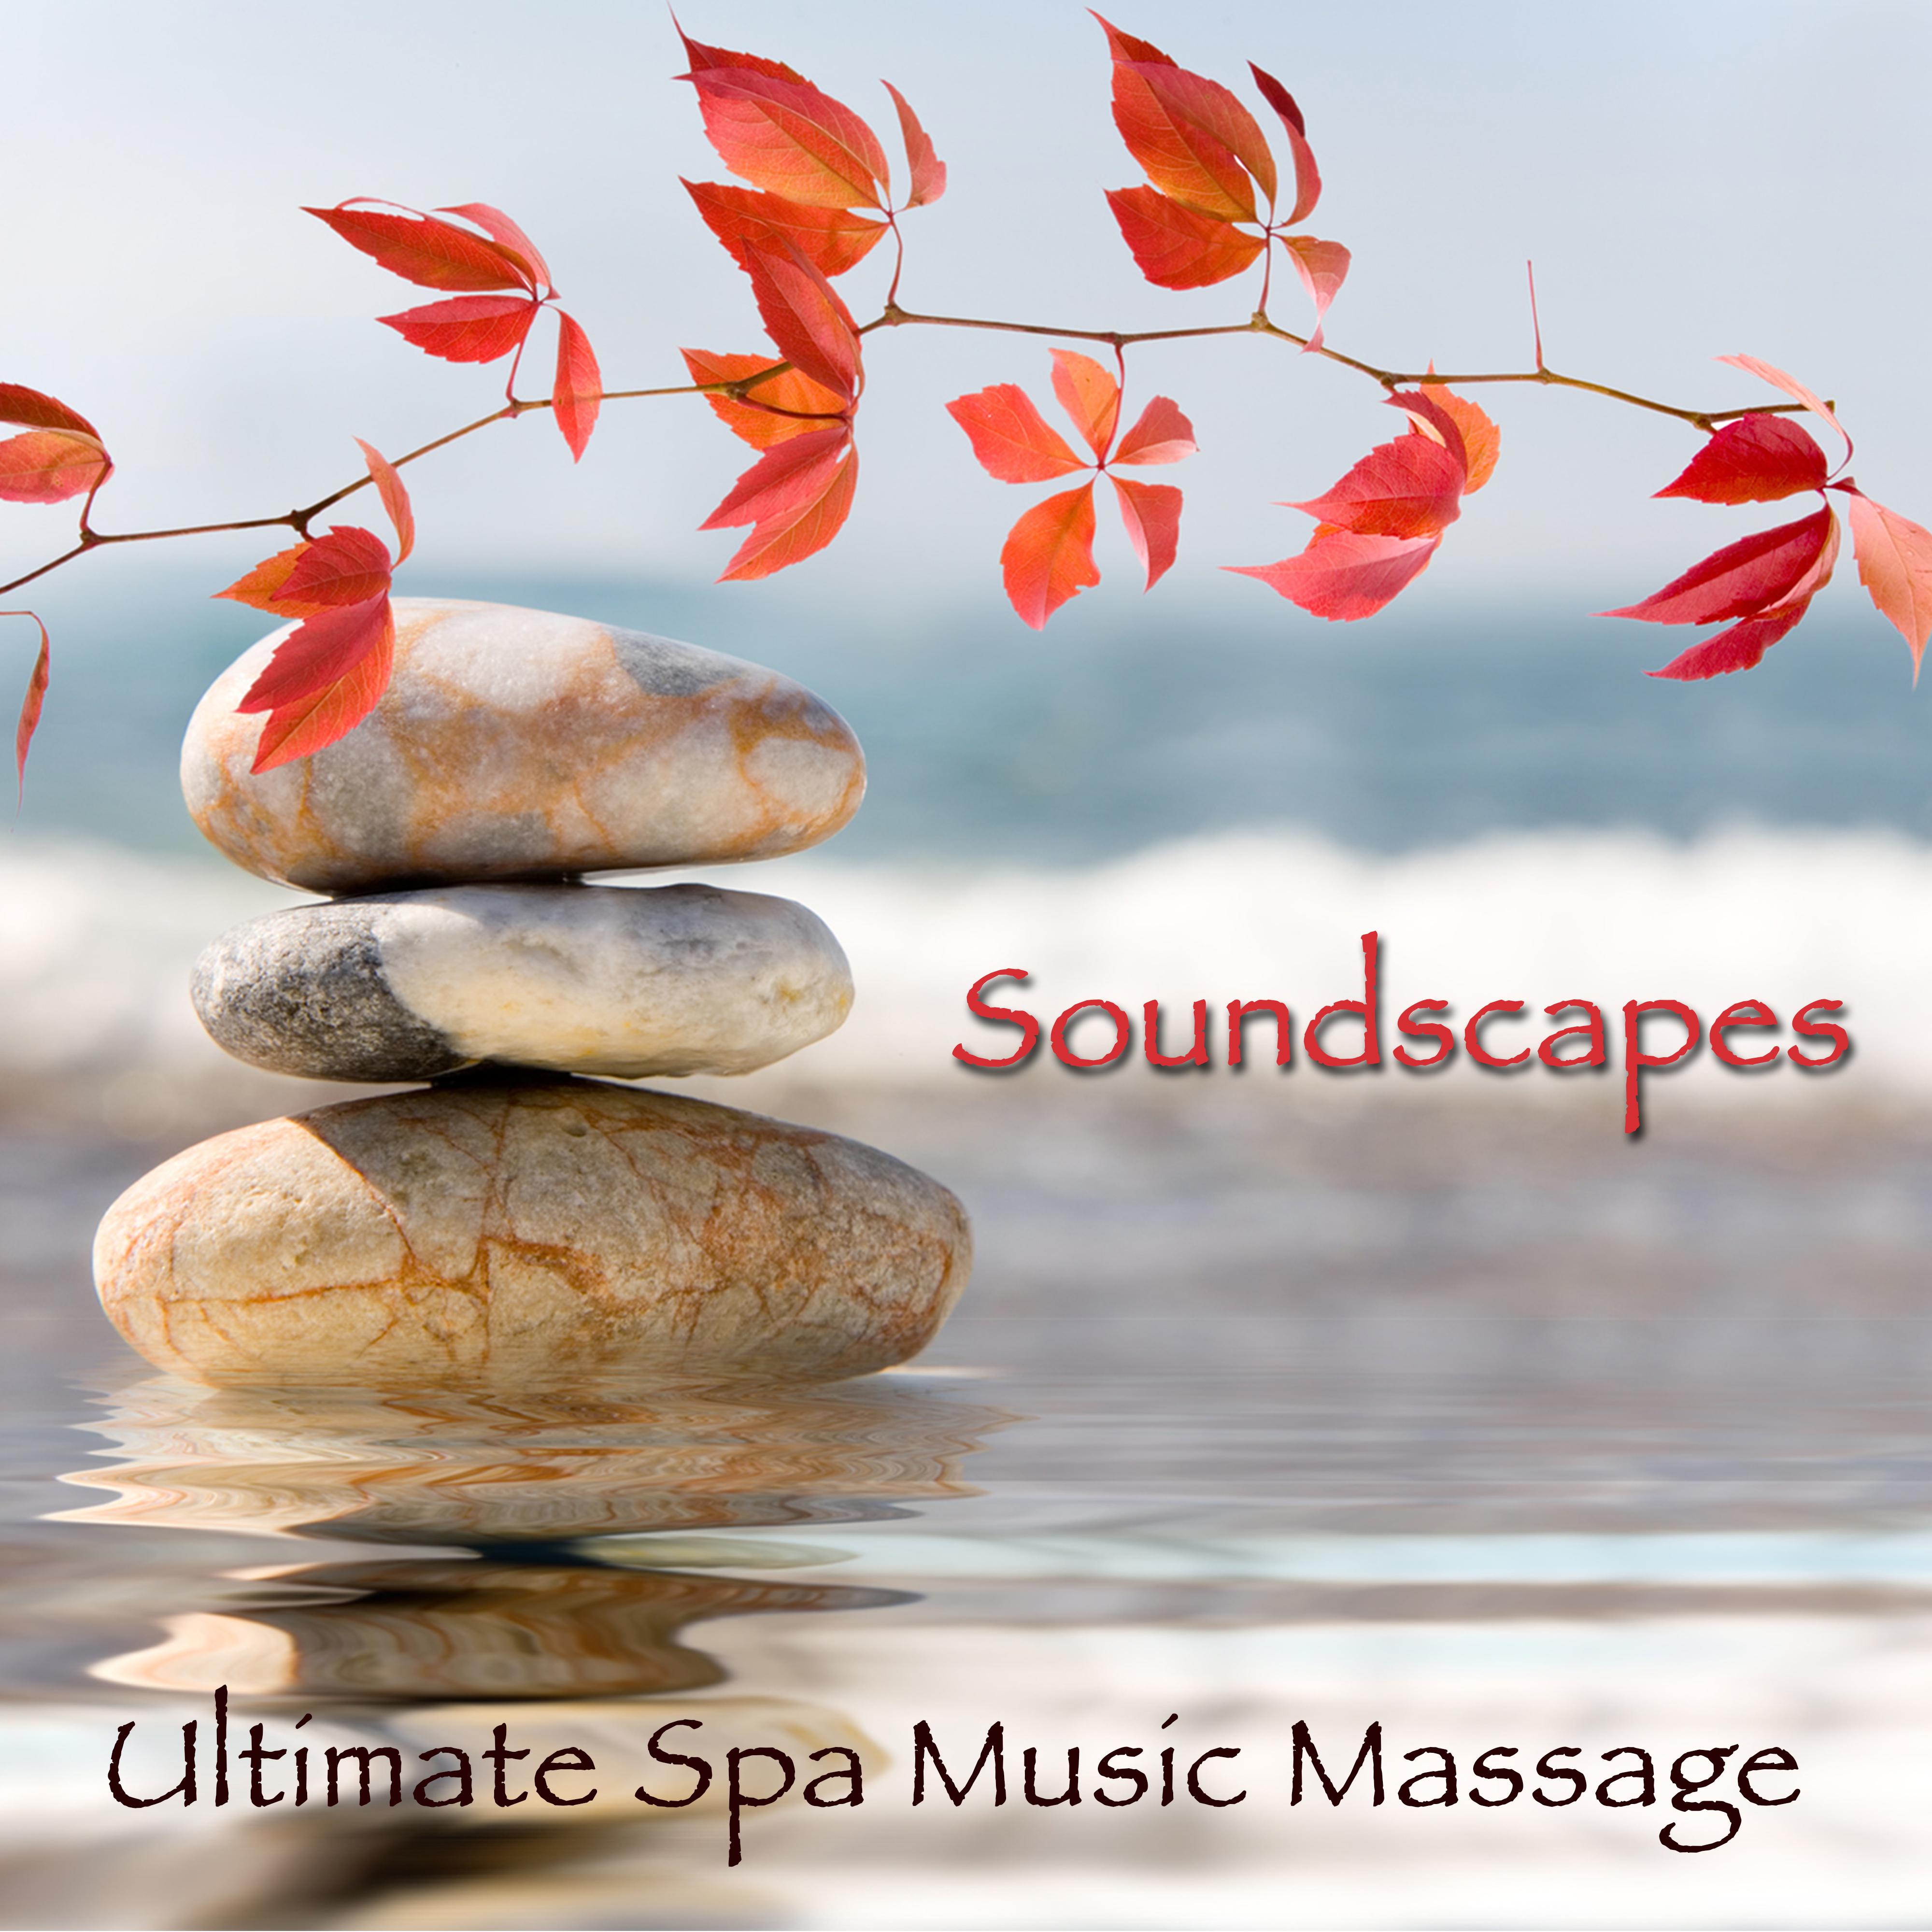 Soundscapes  Ultimate Spa Music Massage Buddha Relaxing Sounds for Day Spa